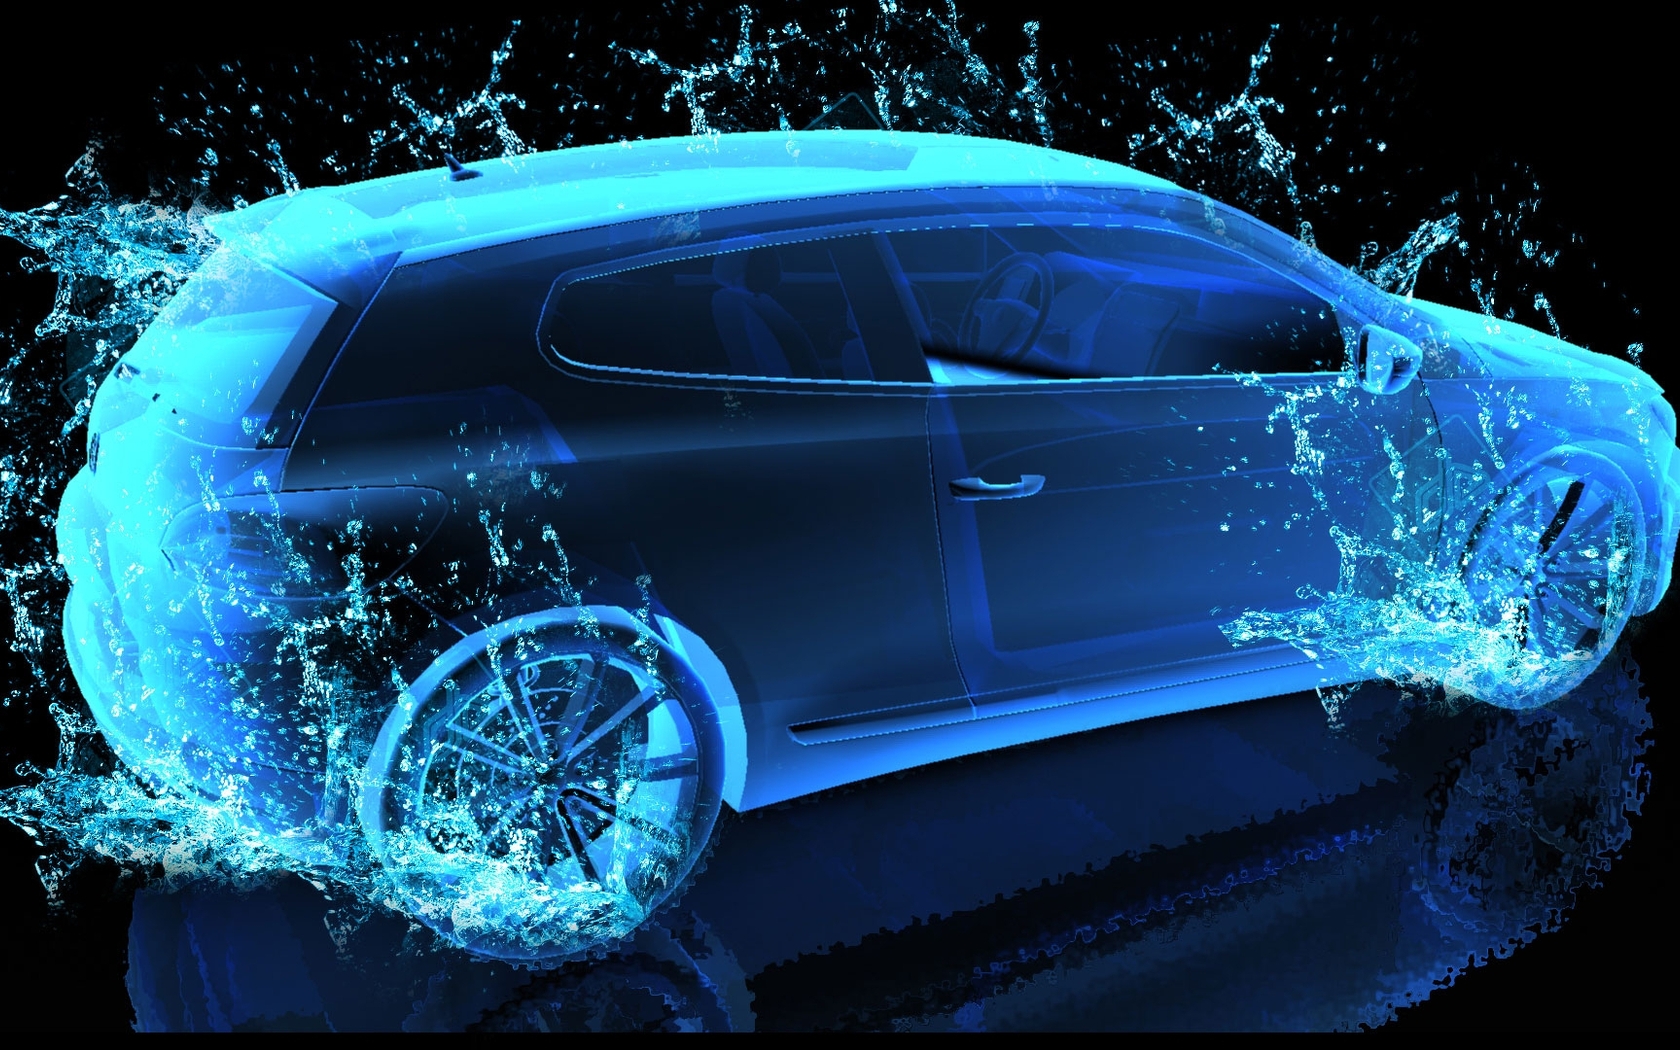 Image: Car, 3D, water, spray, wheels, reflection